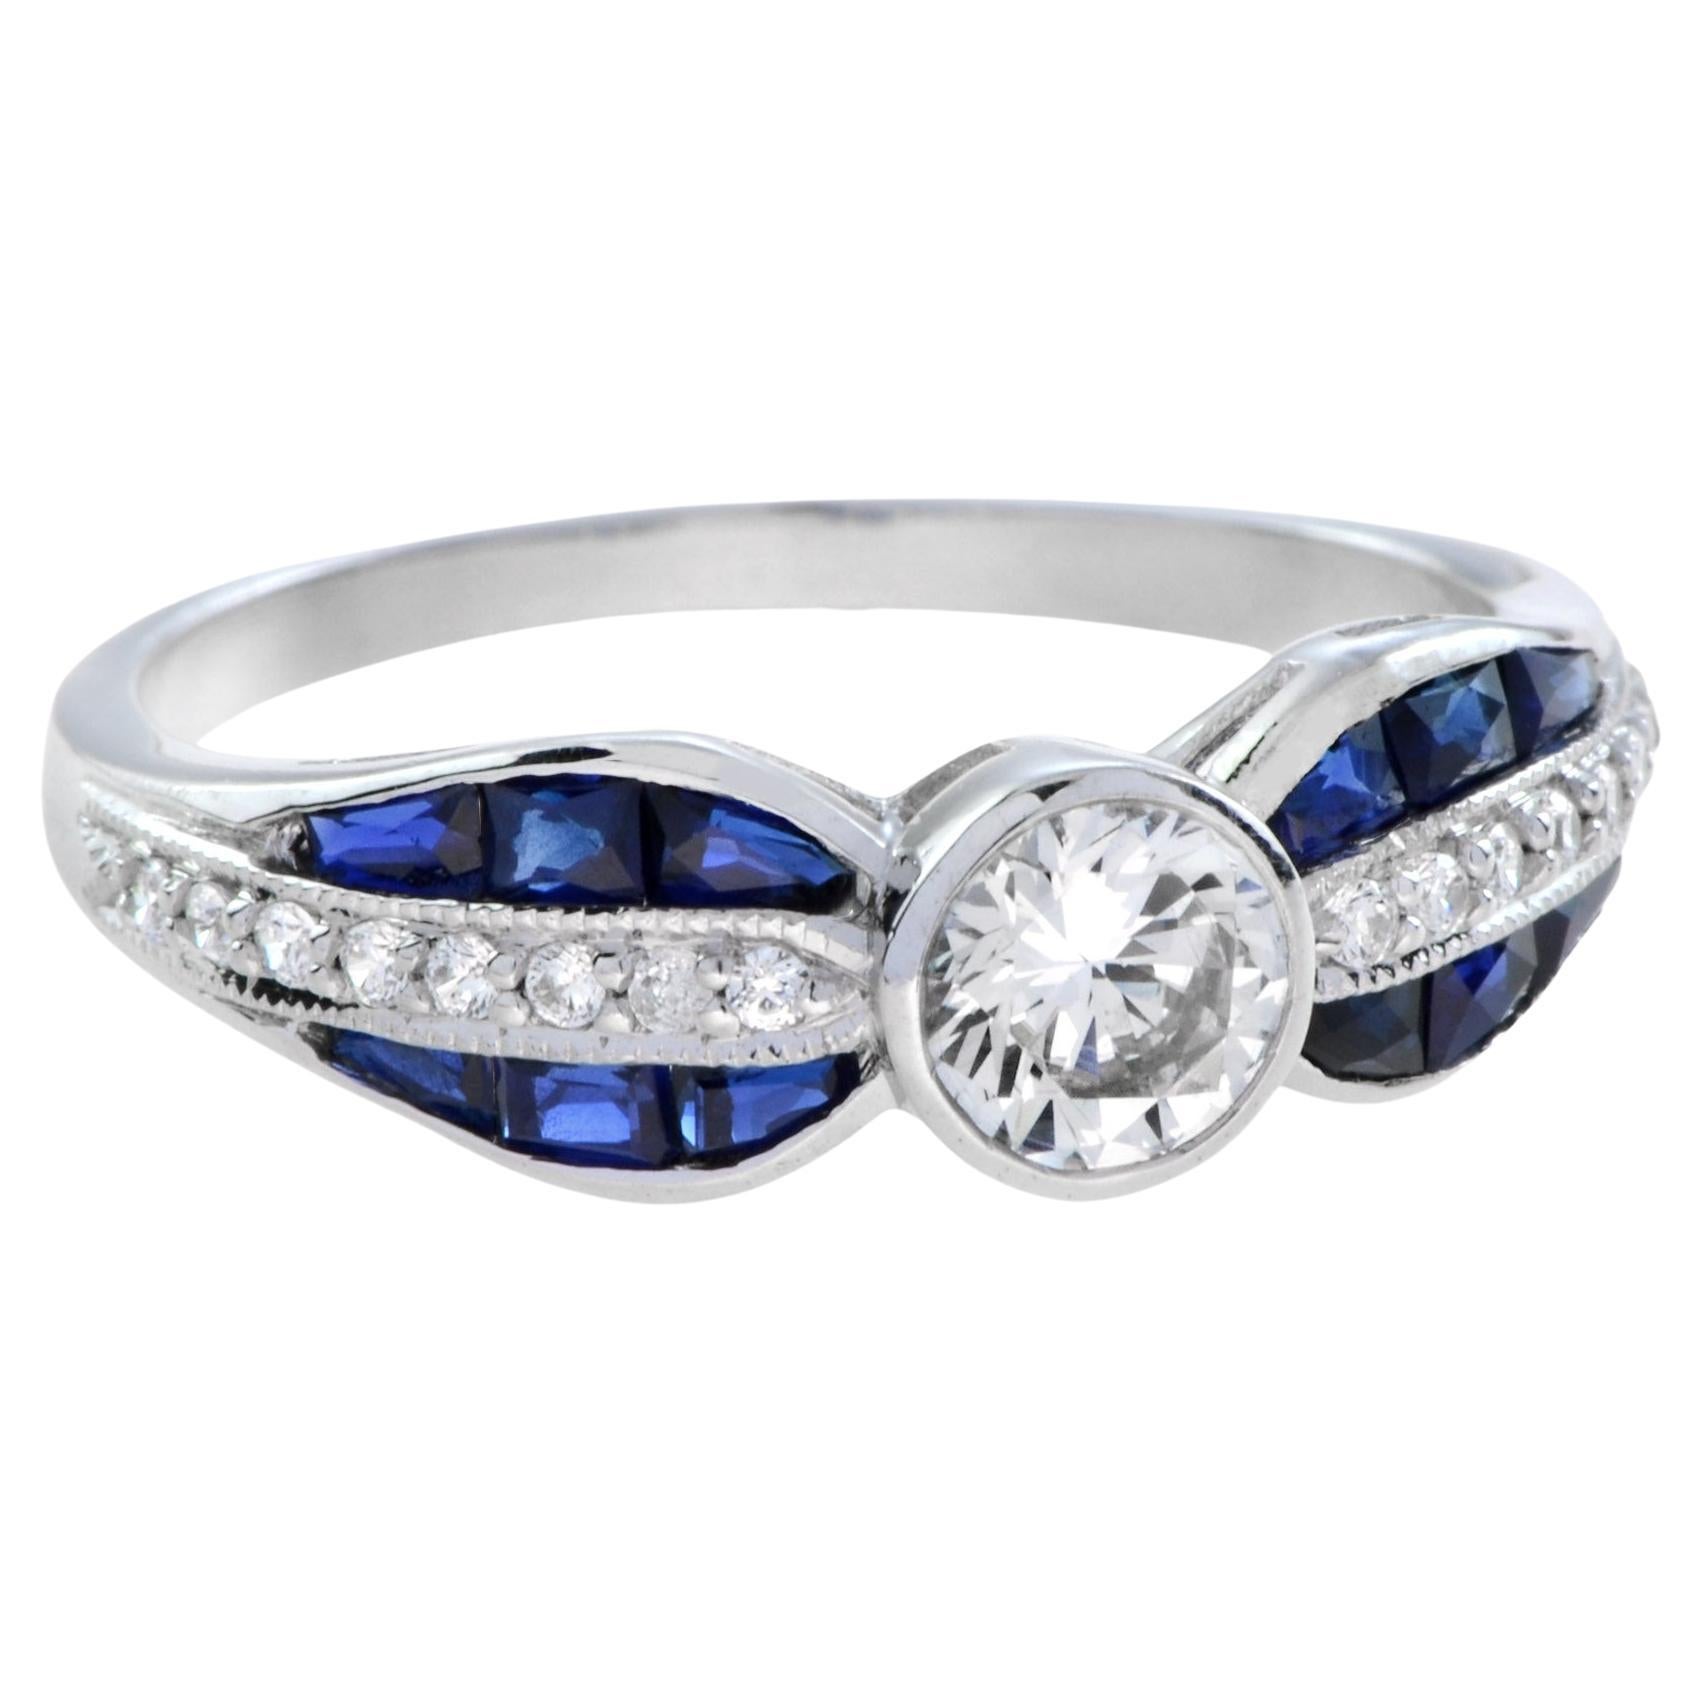 For Sale:  Diamond and Sapphire Art Deco Style Solitaire Ring in 18K White Gold